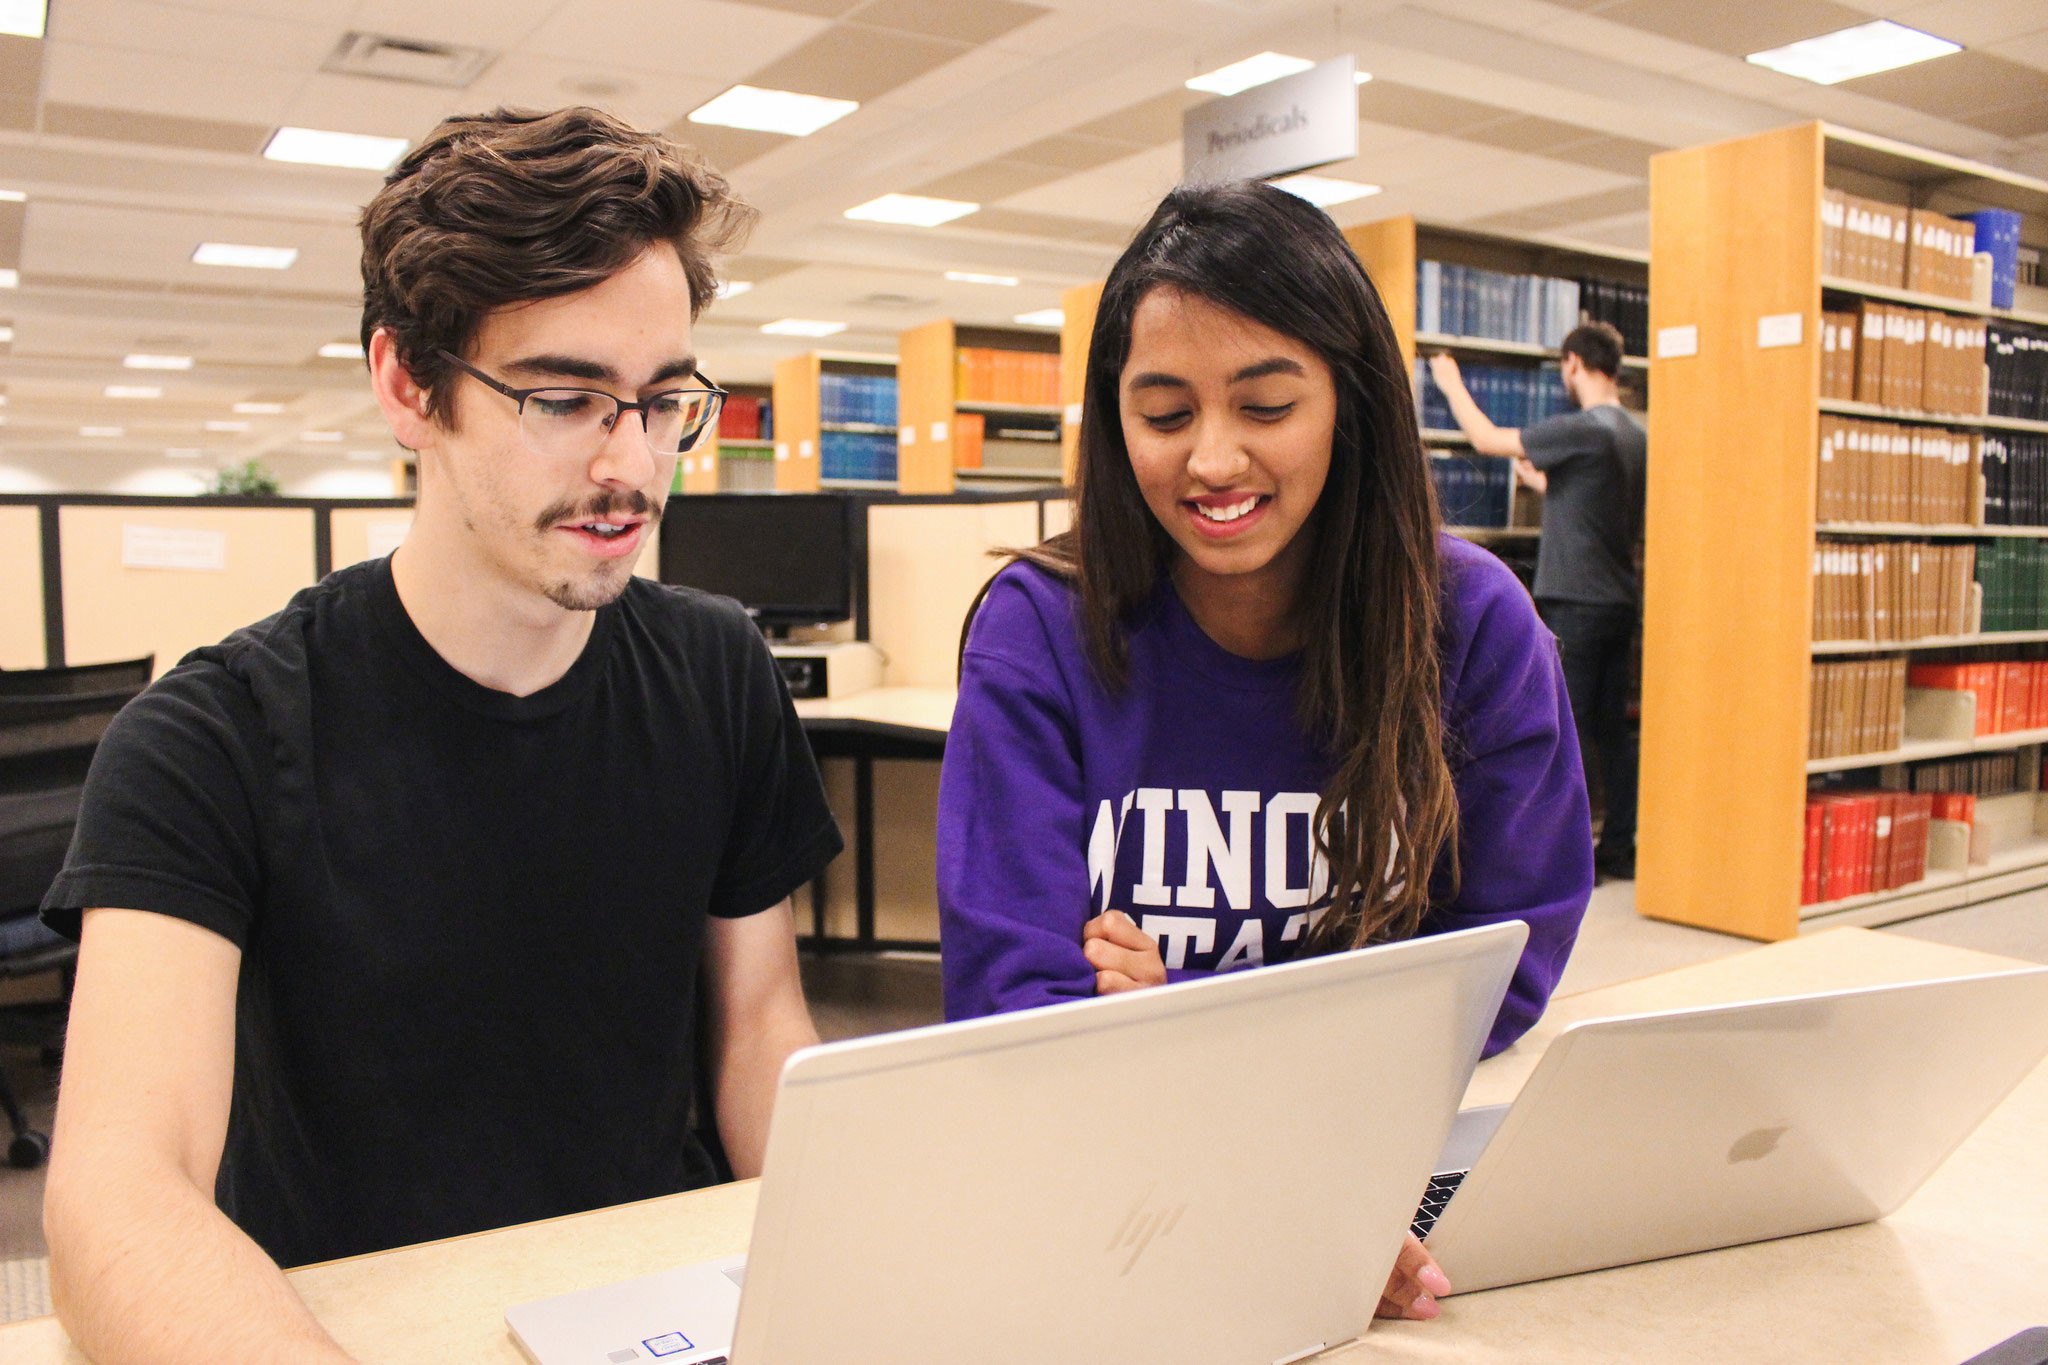 Two WSU students working together on their laptops.